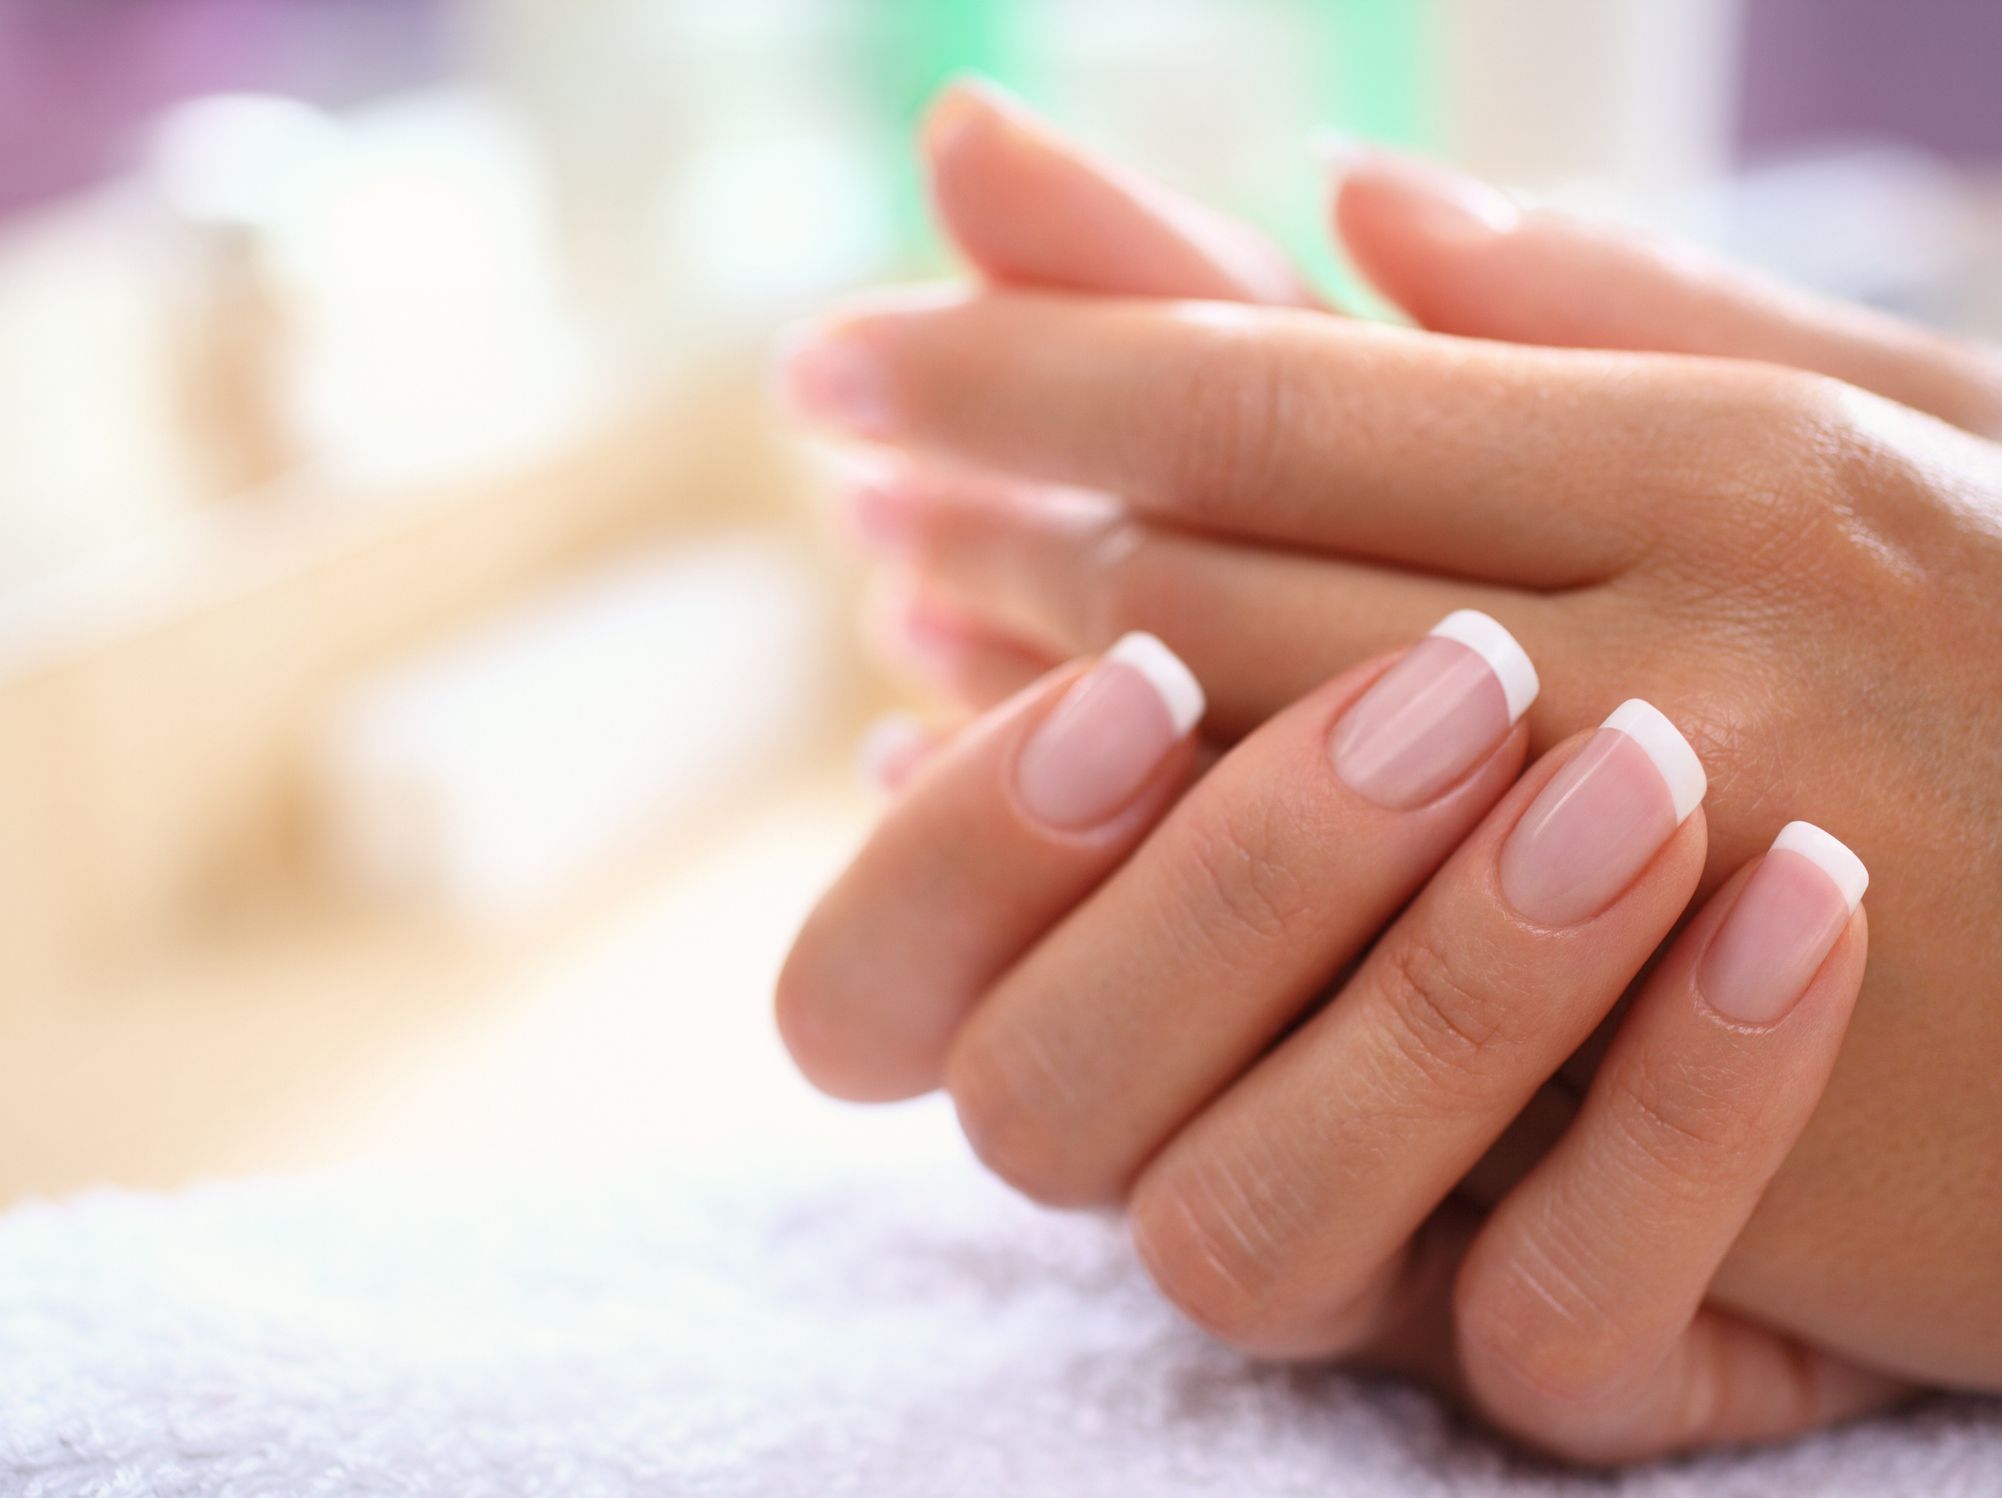 Cuticle Care At Home - Tips to Safely Push Back and Trim Cuticles